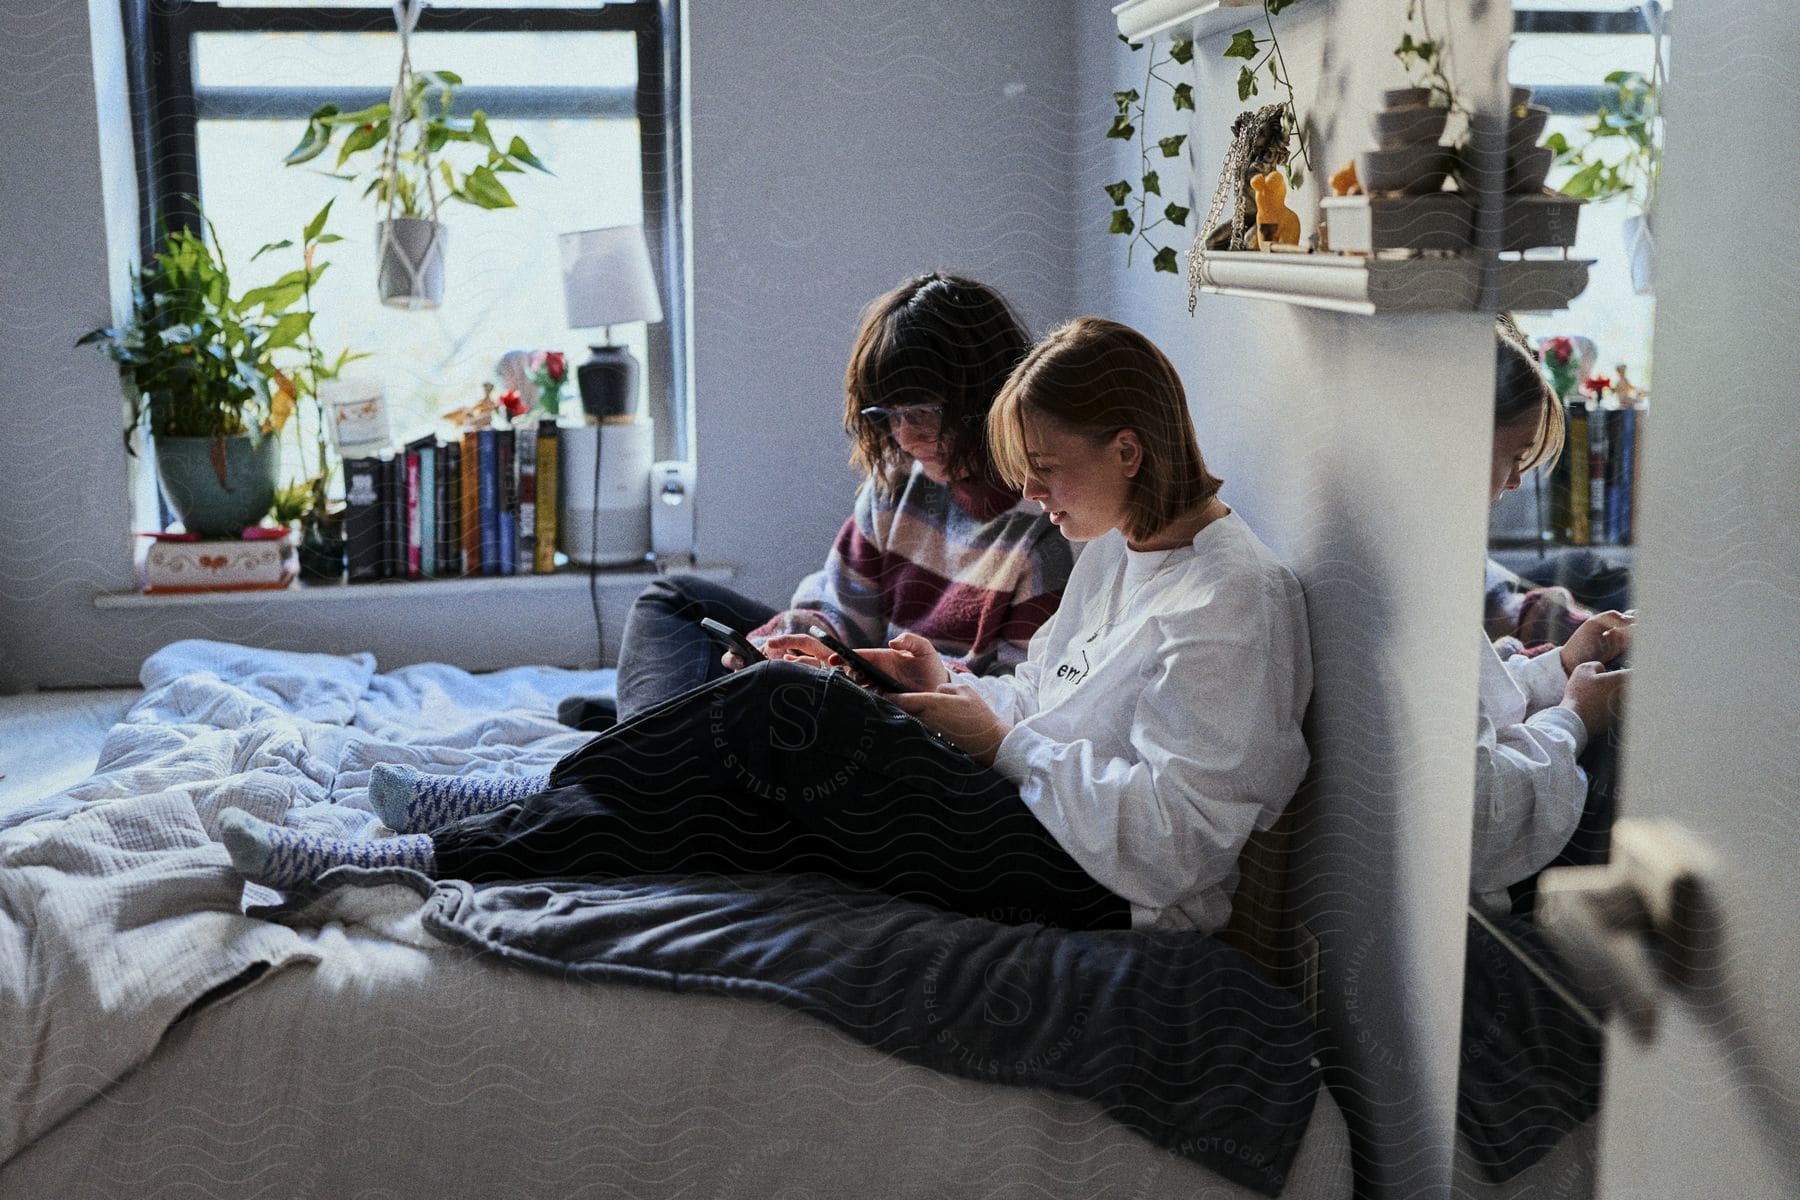 two teens look at their phones while sitting in bed together